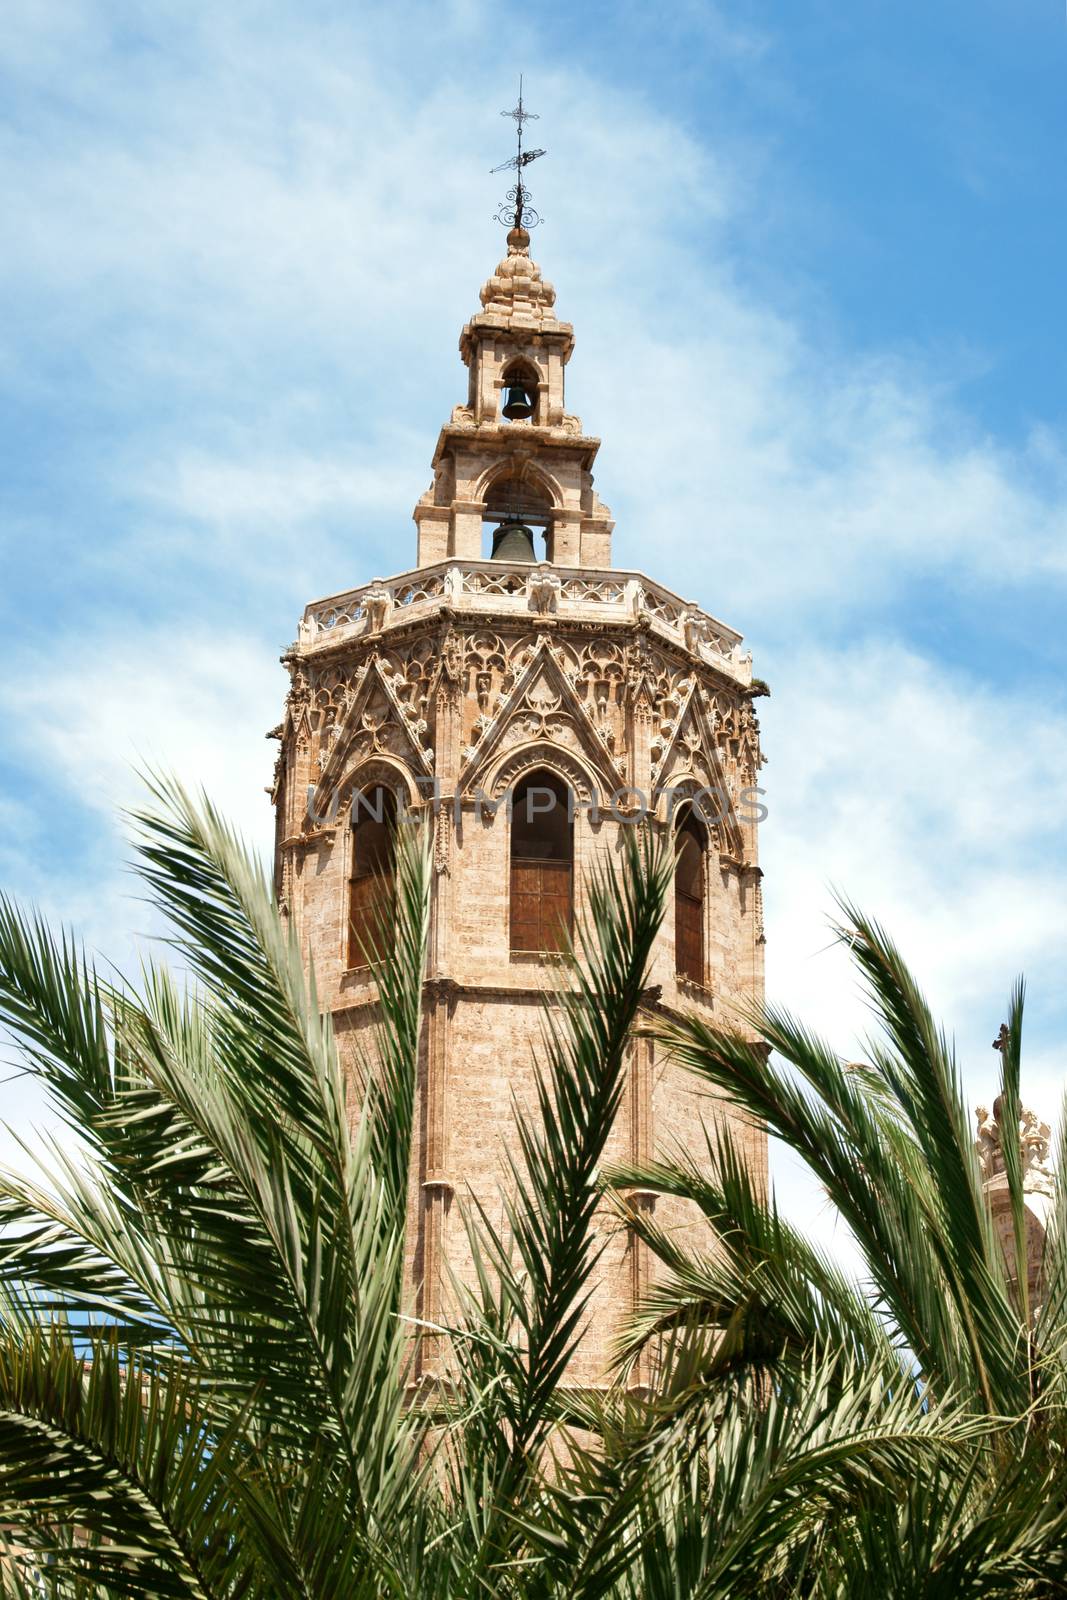 El Miguelete, the gothic bell tower of Valencia Cathedral in Spain, among palms. The Cathedral was built between 1252 and 1482 on the site of a mosque and previosly a roman temple dedicated to Diana.